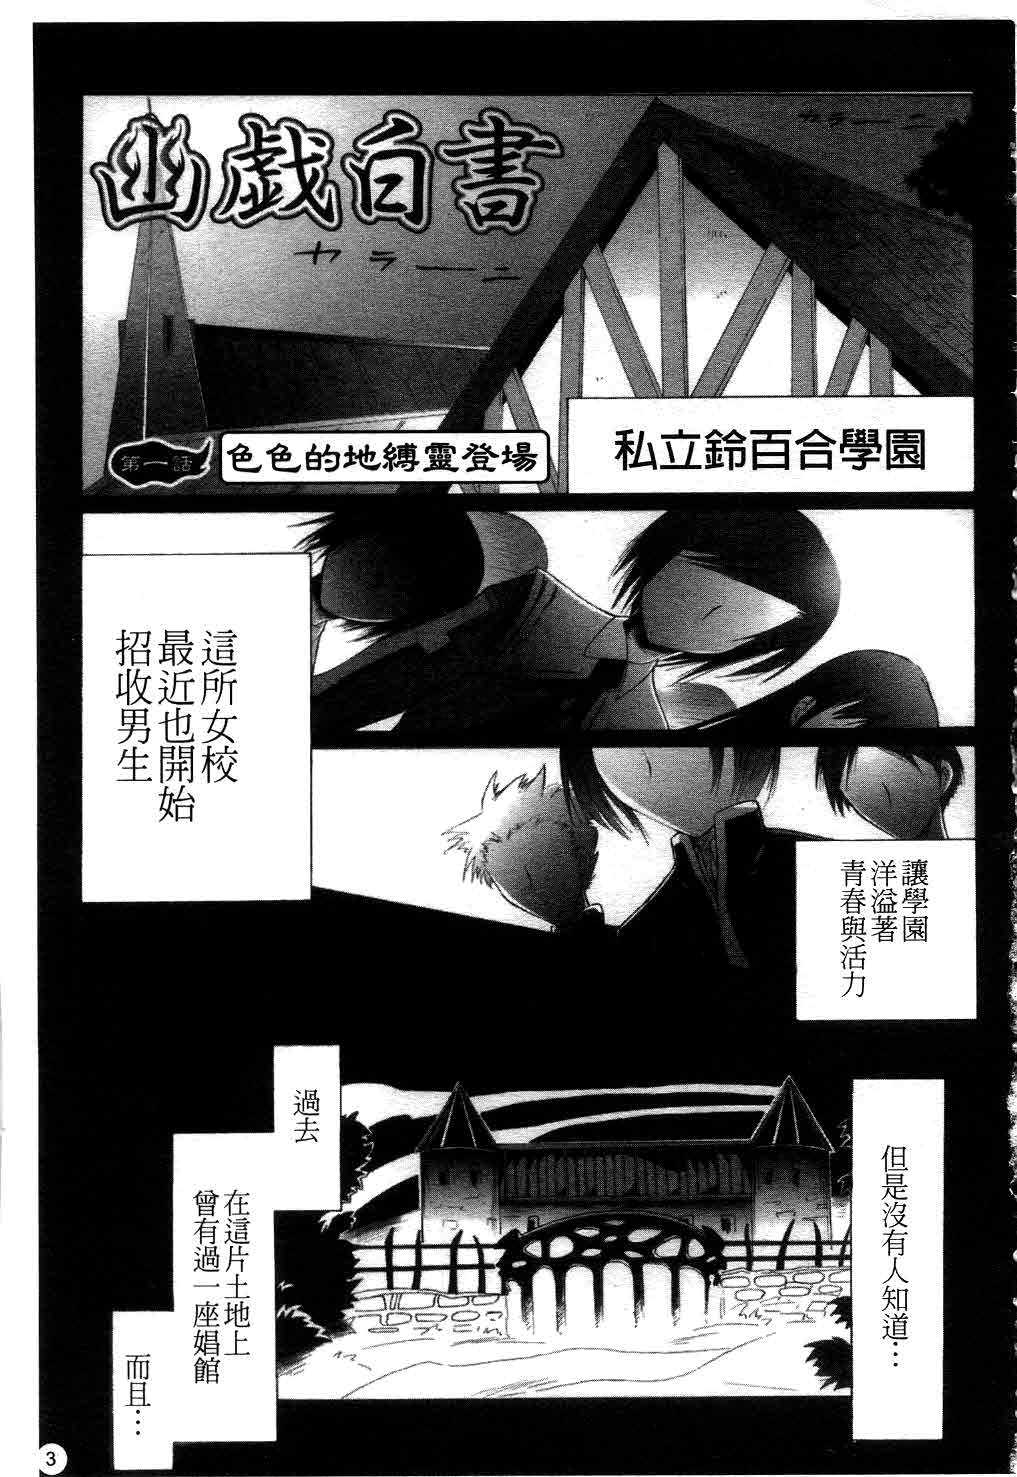 [Fudou Ran] White Paper of Obscene Ghost (chinese) [不動乱] 幽戯白書 ムーグコミックス (中文)